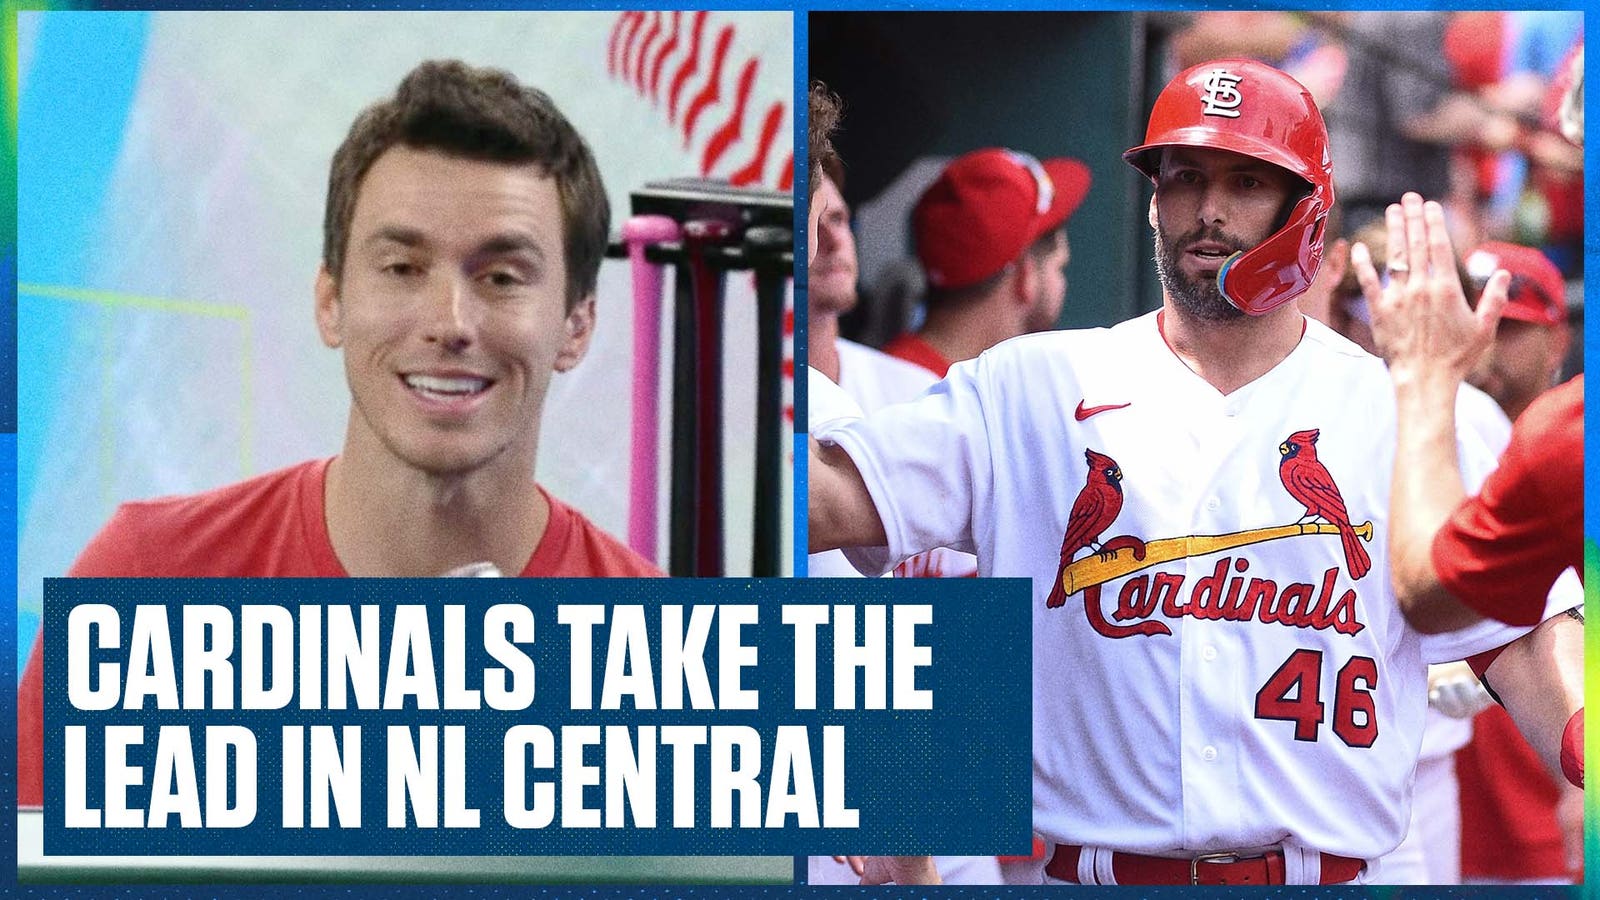 St. Louis Cardinals will win the NL Central